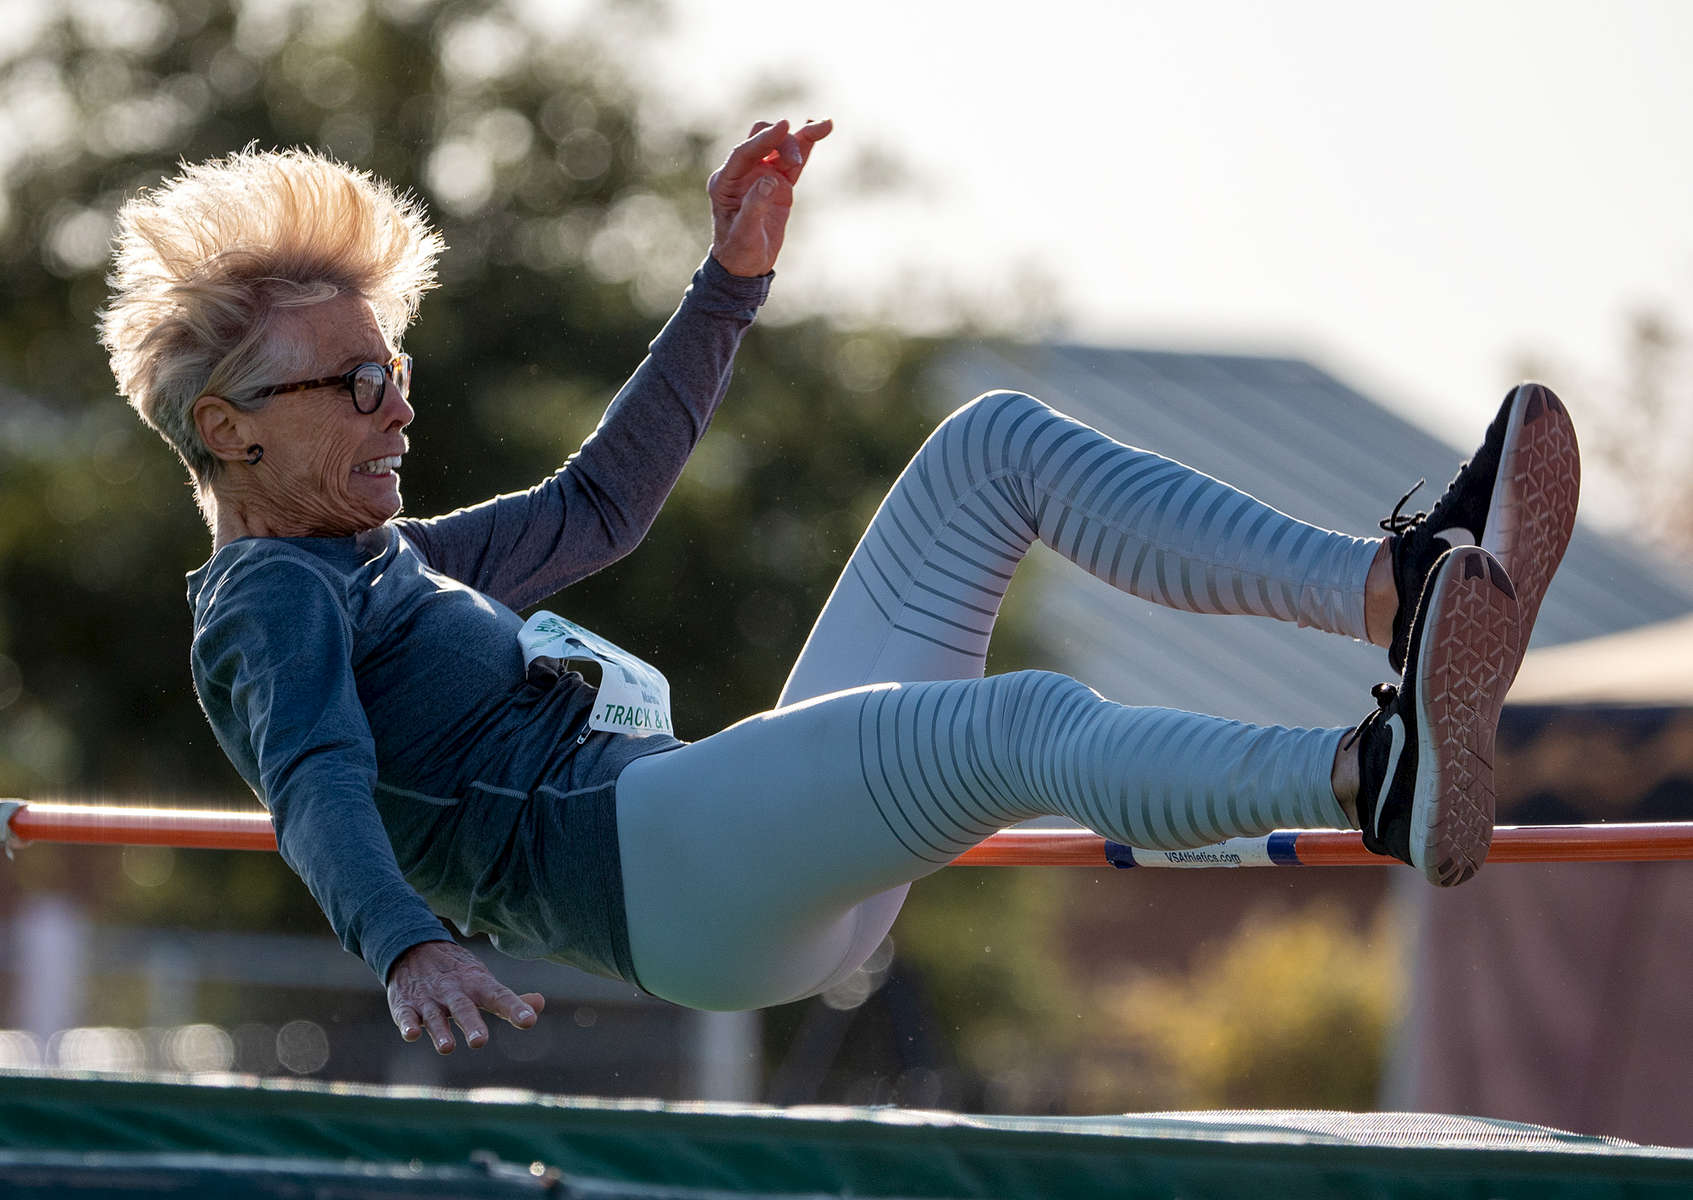 Senior athlete Marina Worsley aged seventy six competes in the high Jump event during the Huntsman World Senior Games on October 14, 2019 in St. George, Utah.